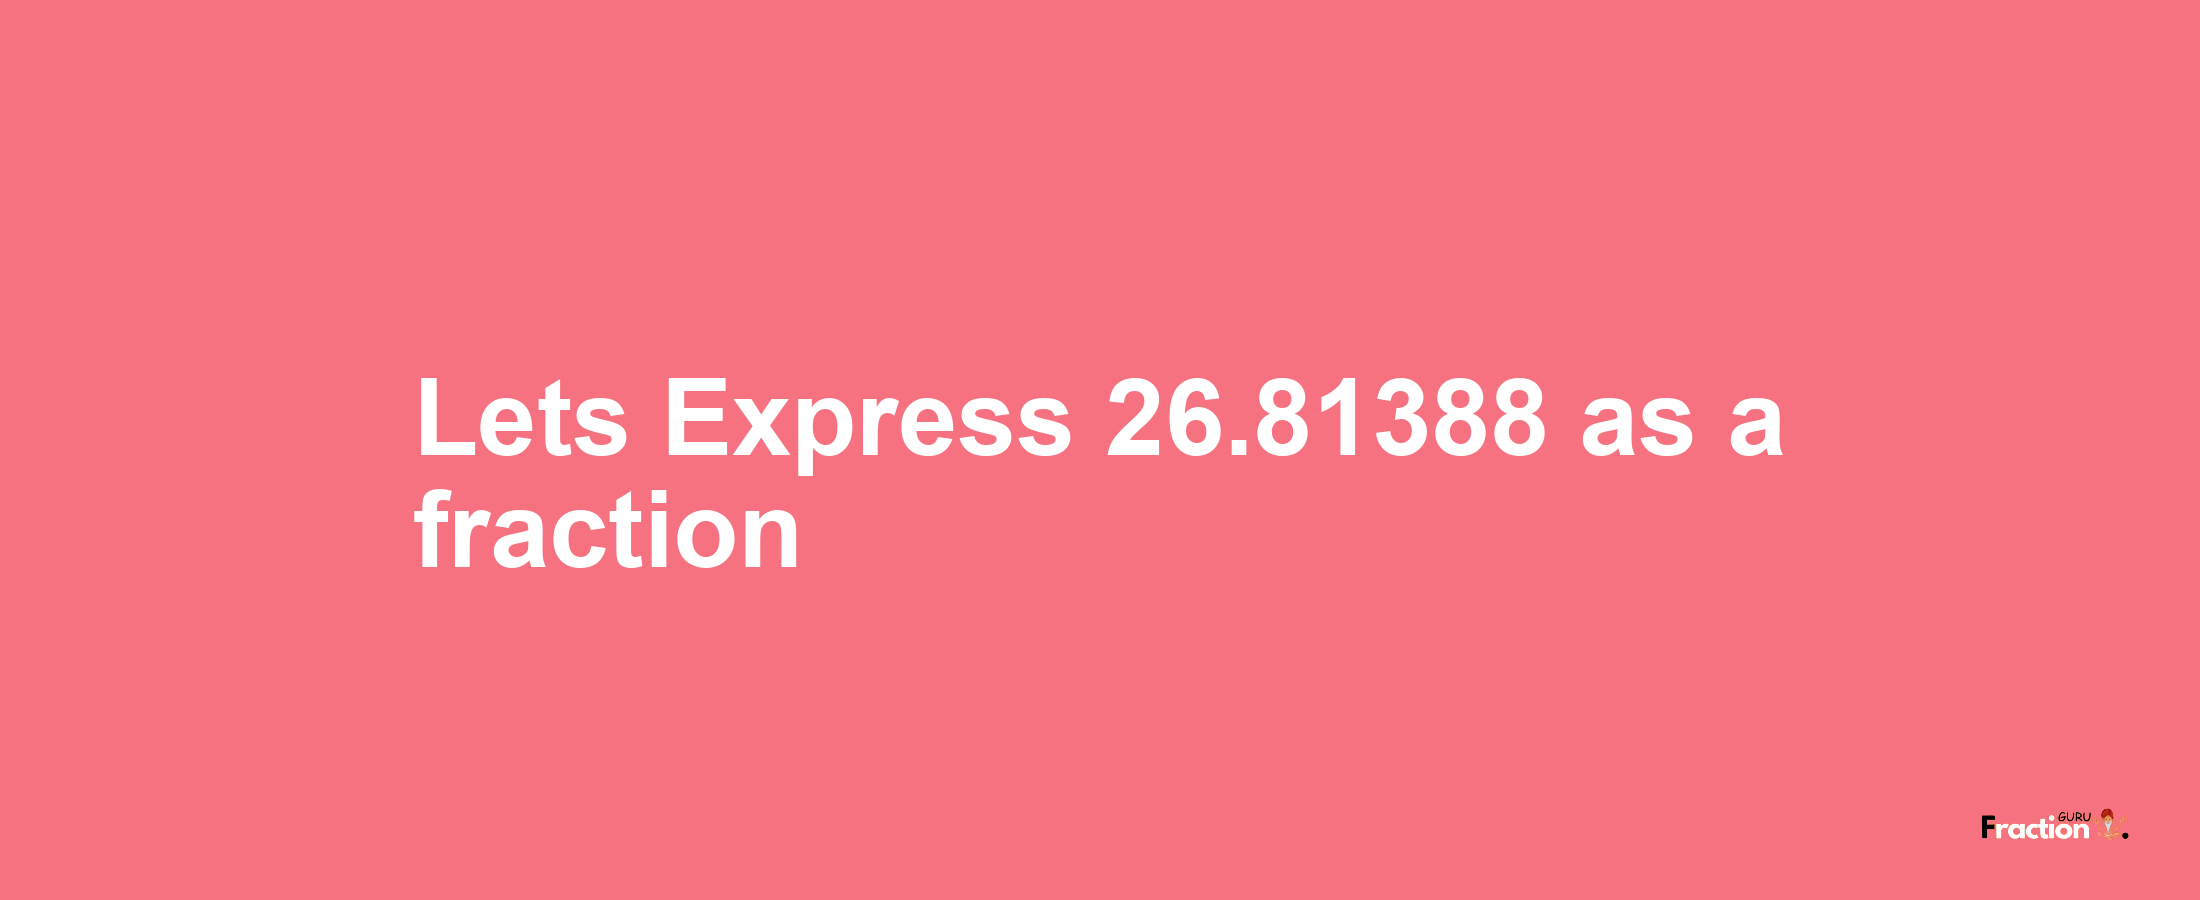 Lets Express 26.81388 as afraction